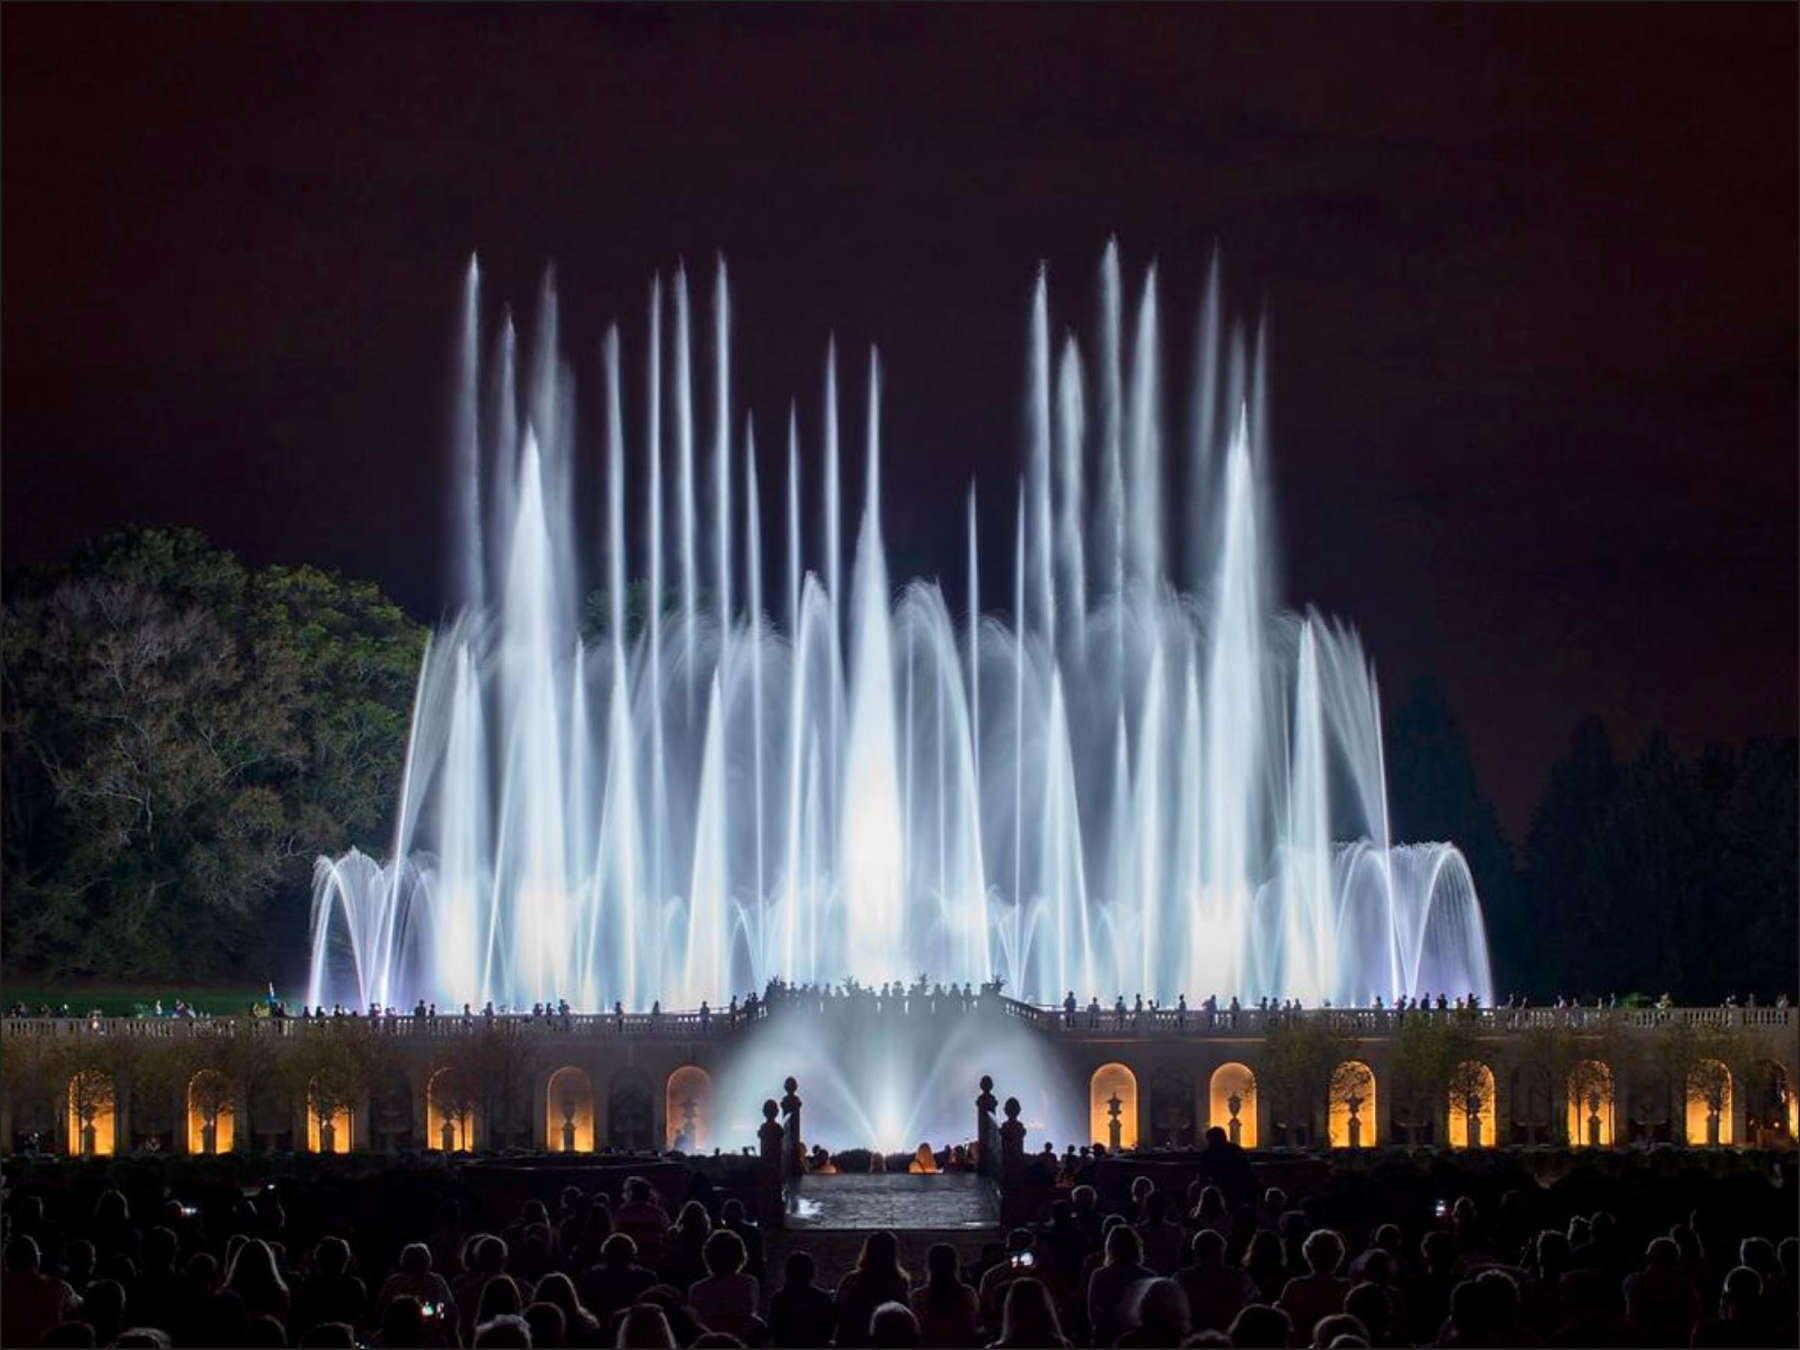 Longwood Gardens (Kennett Square, PA) just completed a heroic adaptive restoration of their famed Main Fountain Garden.  Fluidity worked to restore and enhance Pierre Du Pont's ground breaking vision, creating an American fountain garden akin to Versailles or the Villa D'Este.